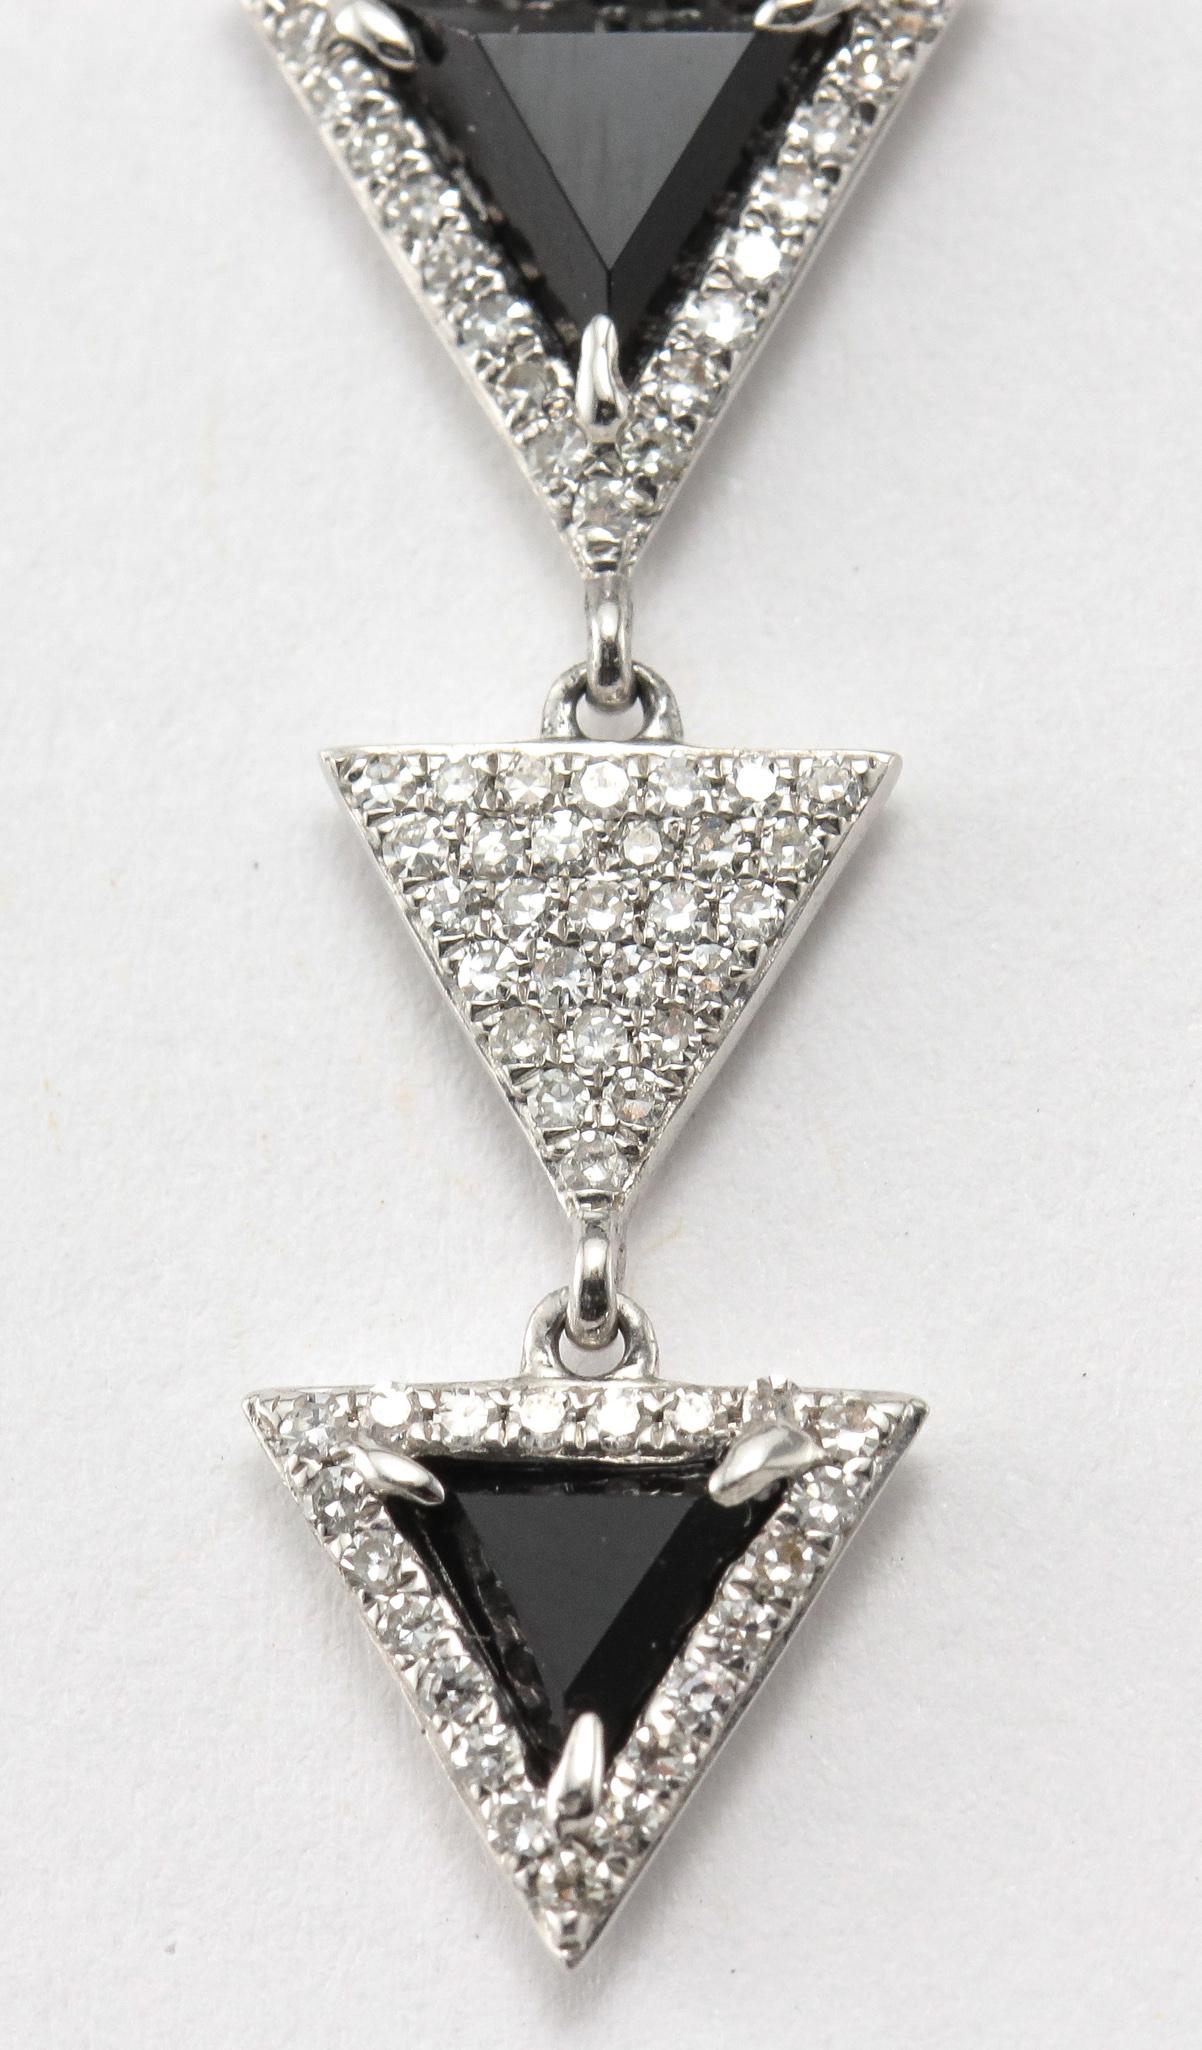 An Elegant Modern pair of Diamond and Black Onyx Dangling Triangles Earrings crafted from Solid 14 Karat White Gold. These earrings feature Triangular Black Onyx Links that are set with Diamonds along with an additional pave' Triangle dangling  2